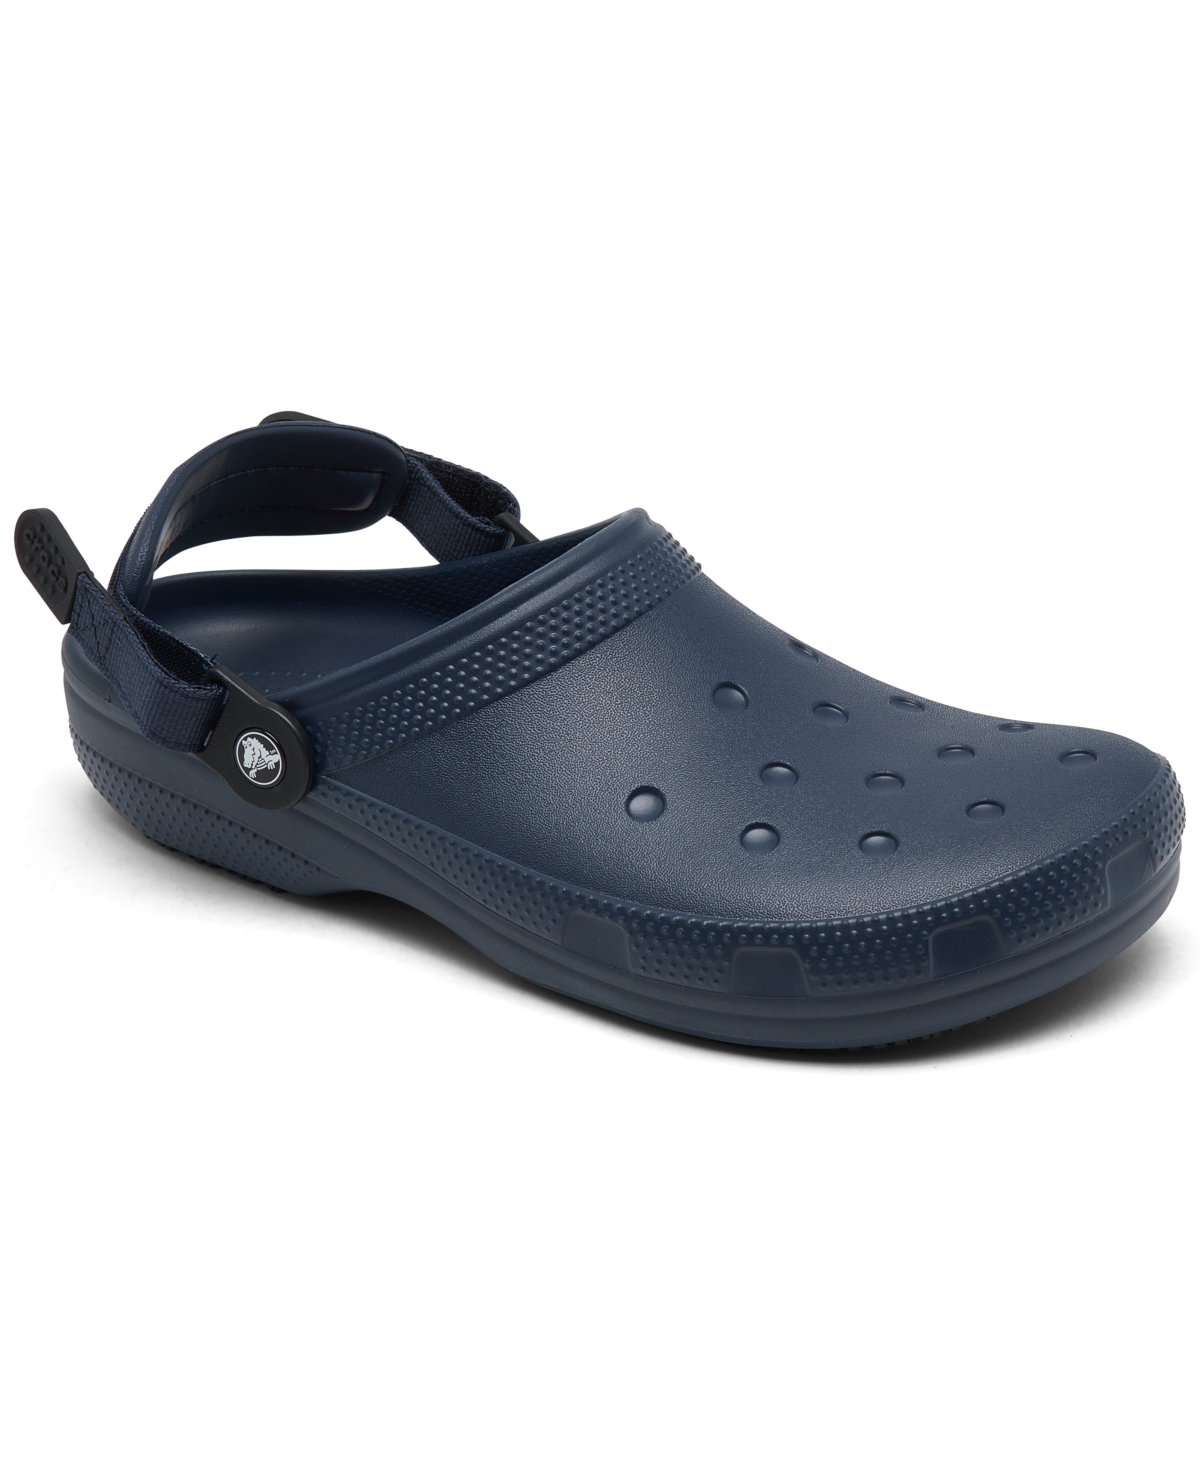 Men's and Women's On-The-Clock Work Slip-On Clogs from Finish Line - Navy